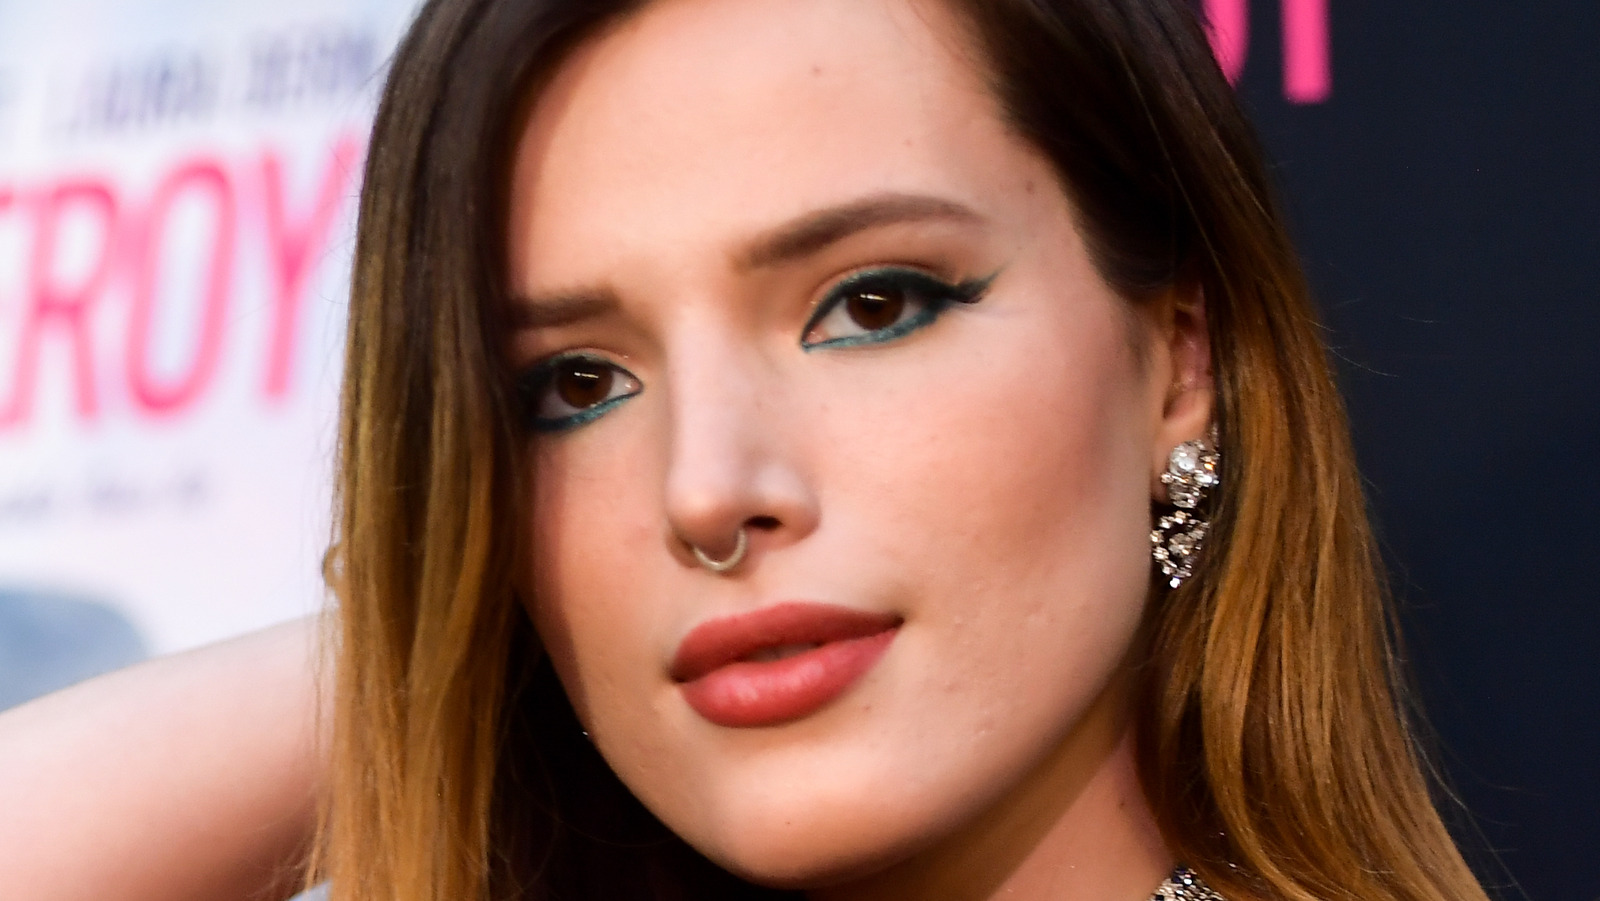 Bella Thorne Porn Interracial - The Truth About Bella Thorne's Scandals